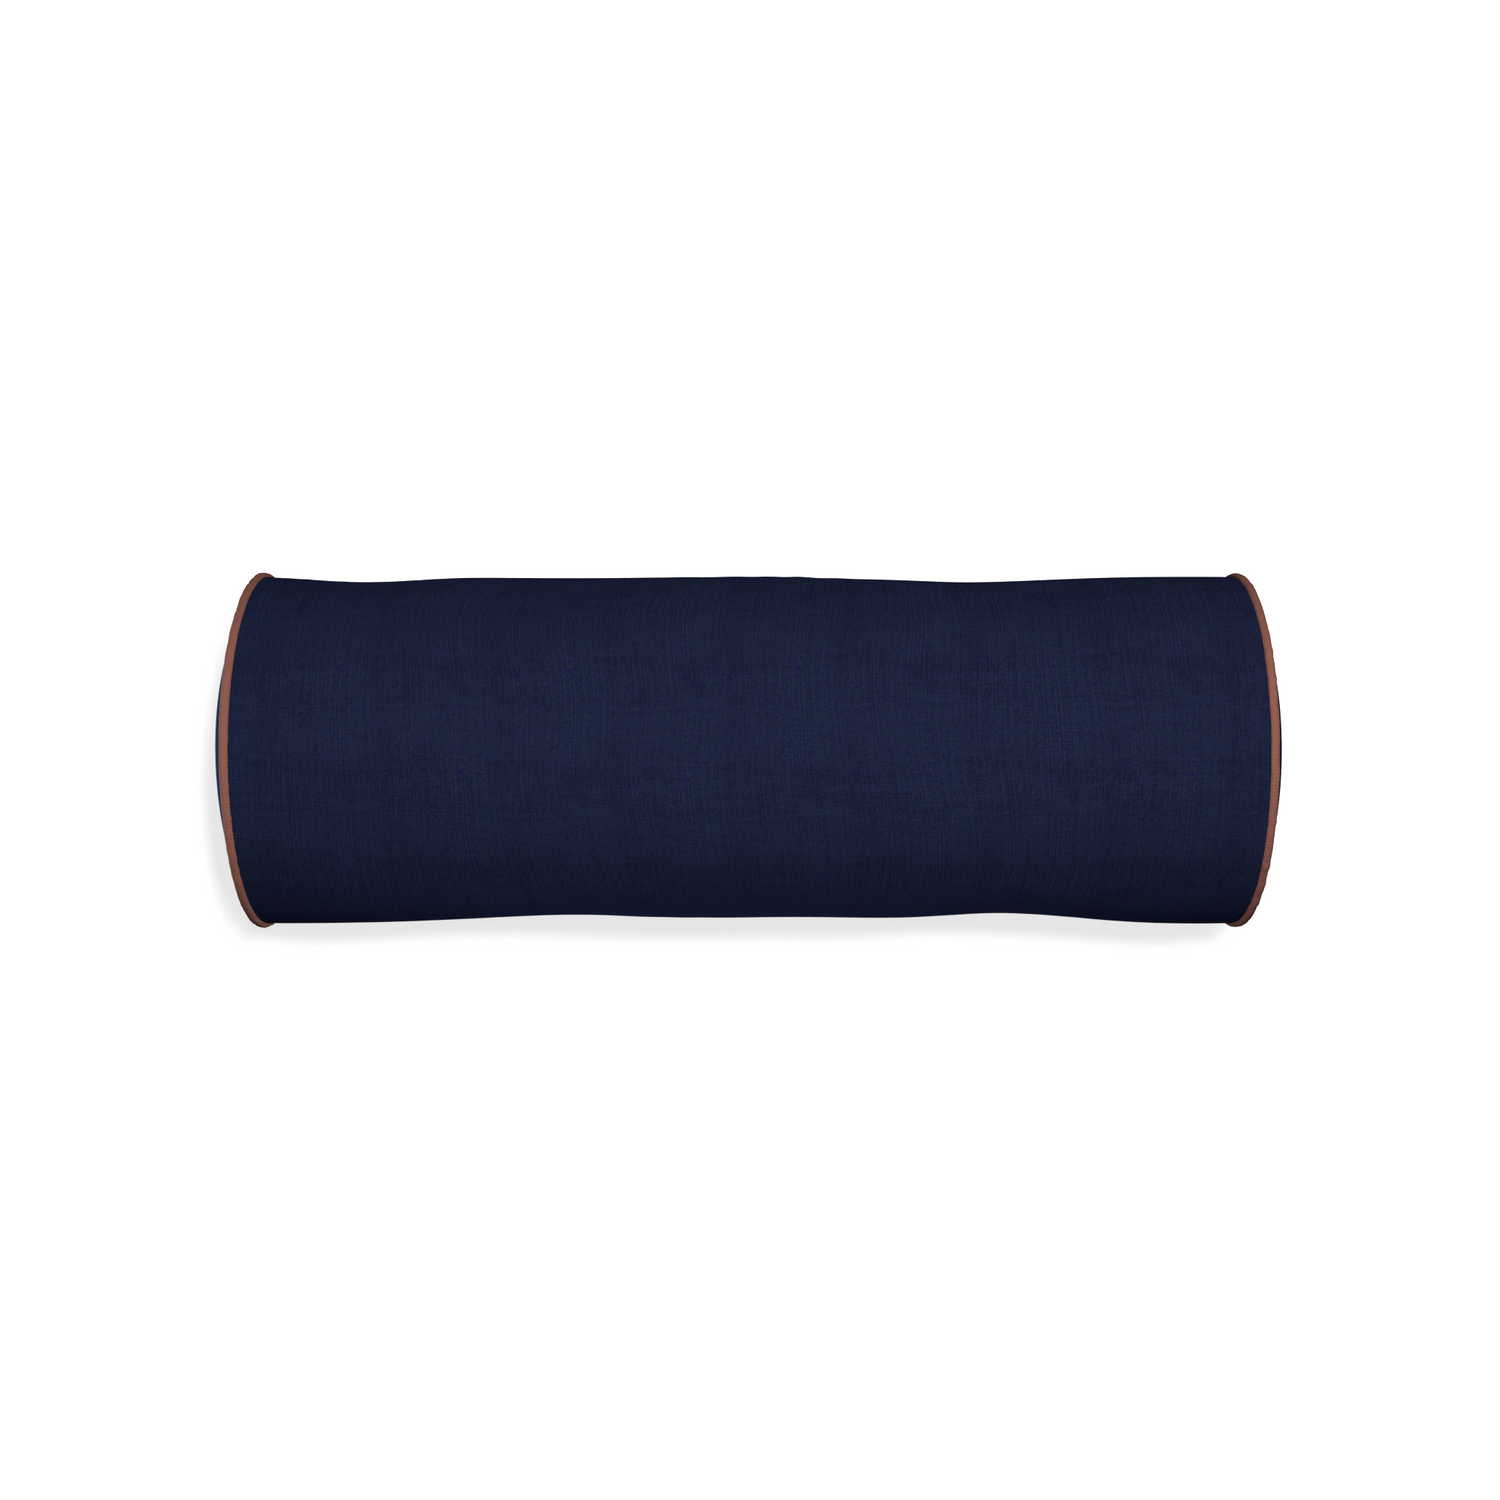 Bolster midnight custom navy bluepillow with w piping on white background